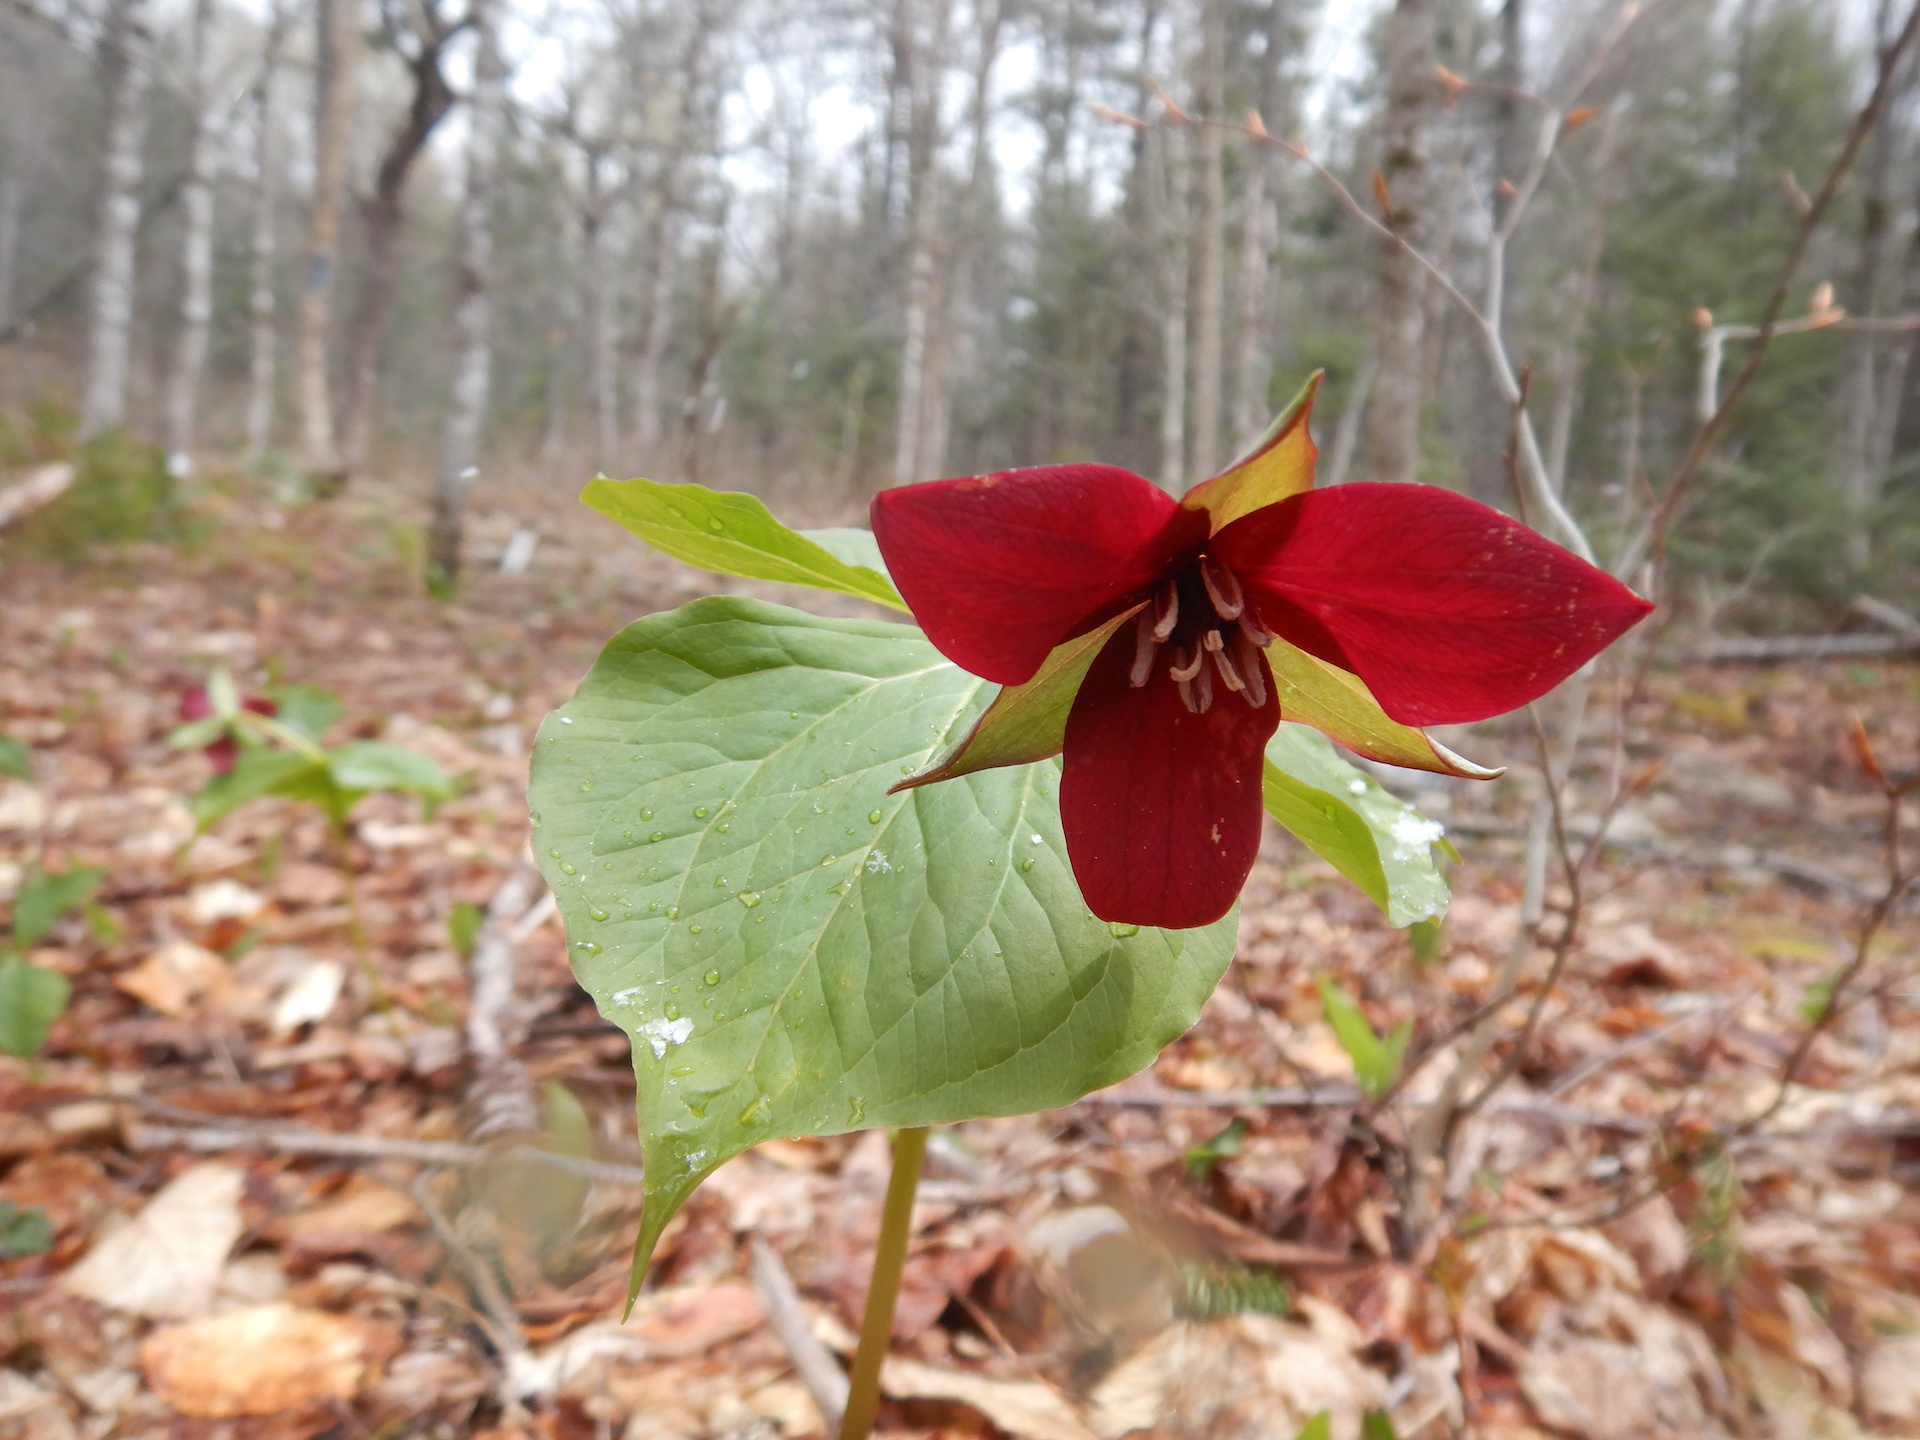 Close up photo of flower in deciduous forest. The flower petals face the camera. The three petals are maroon.